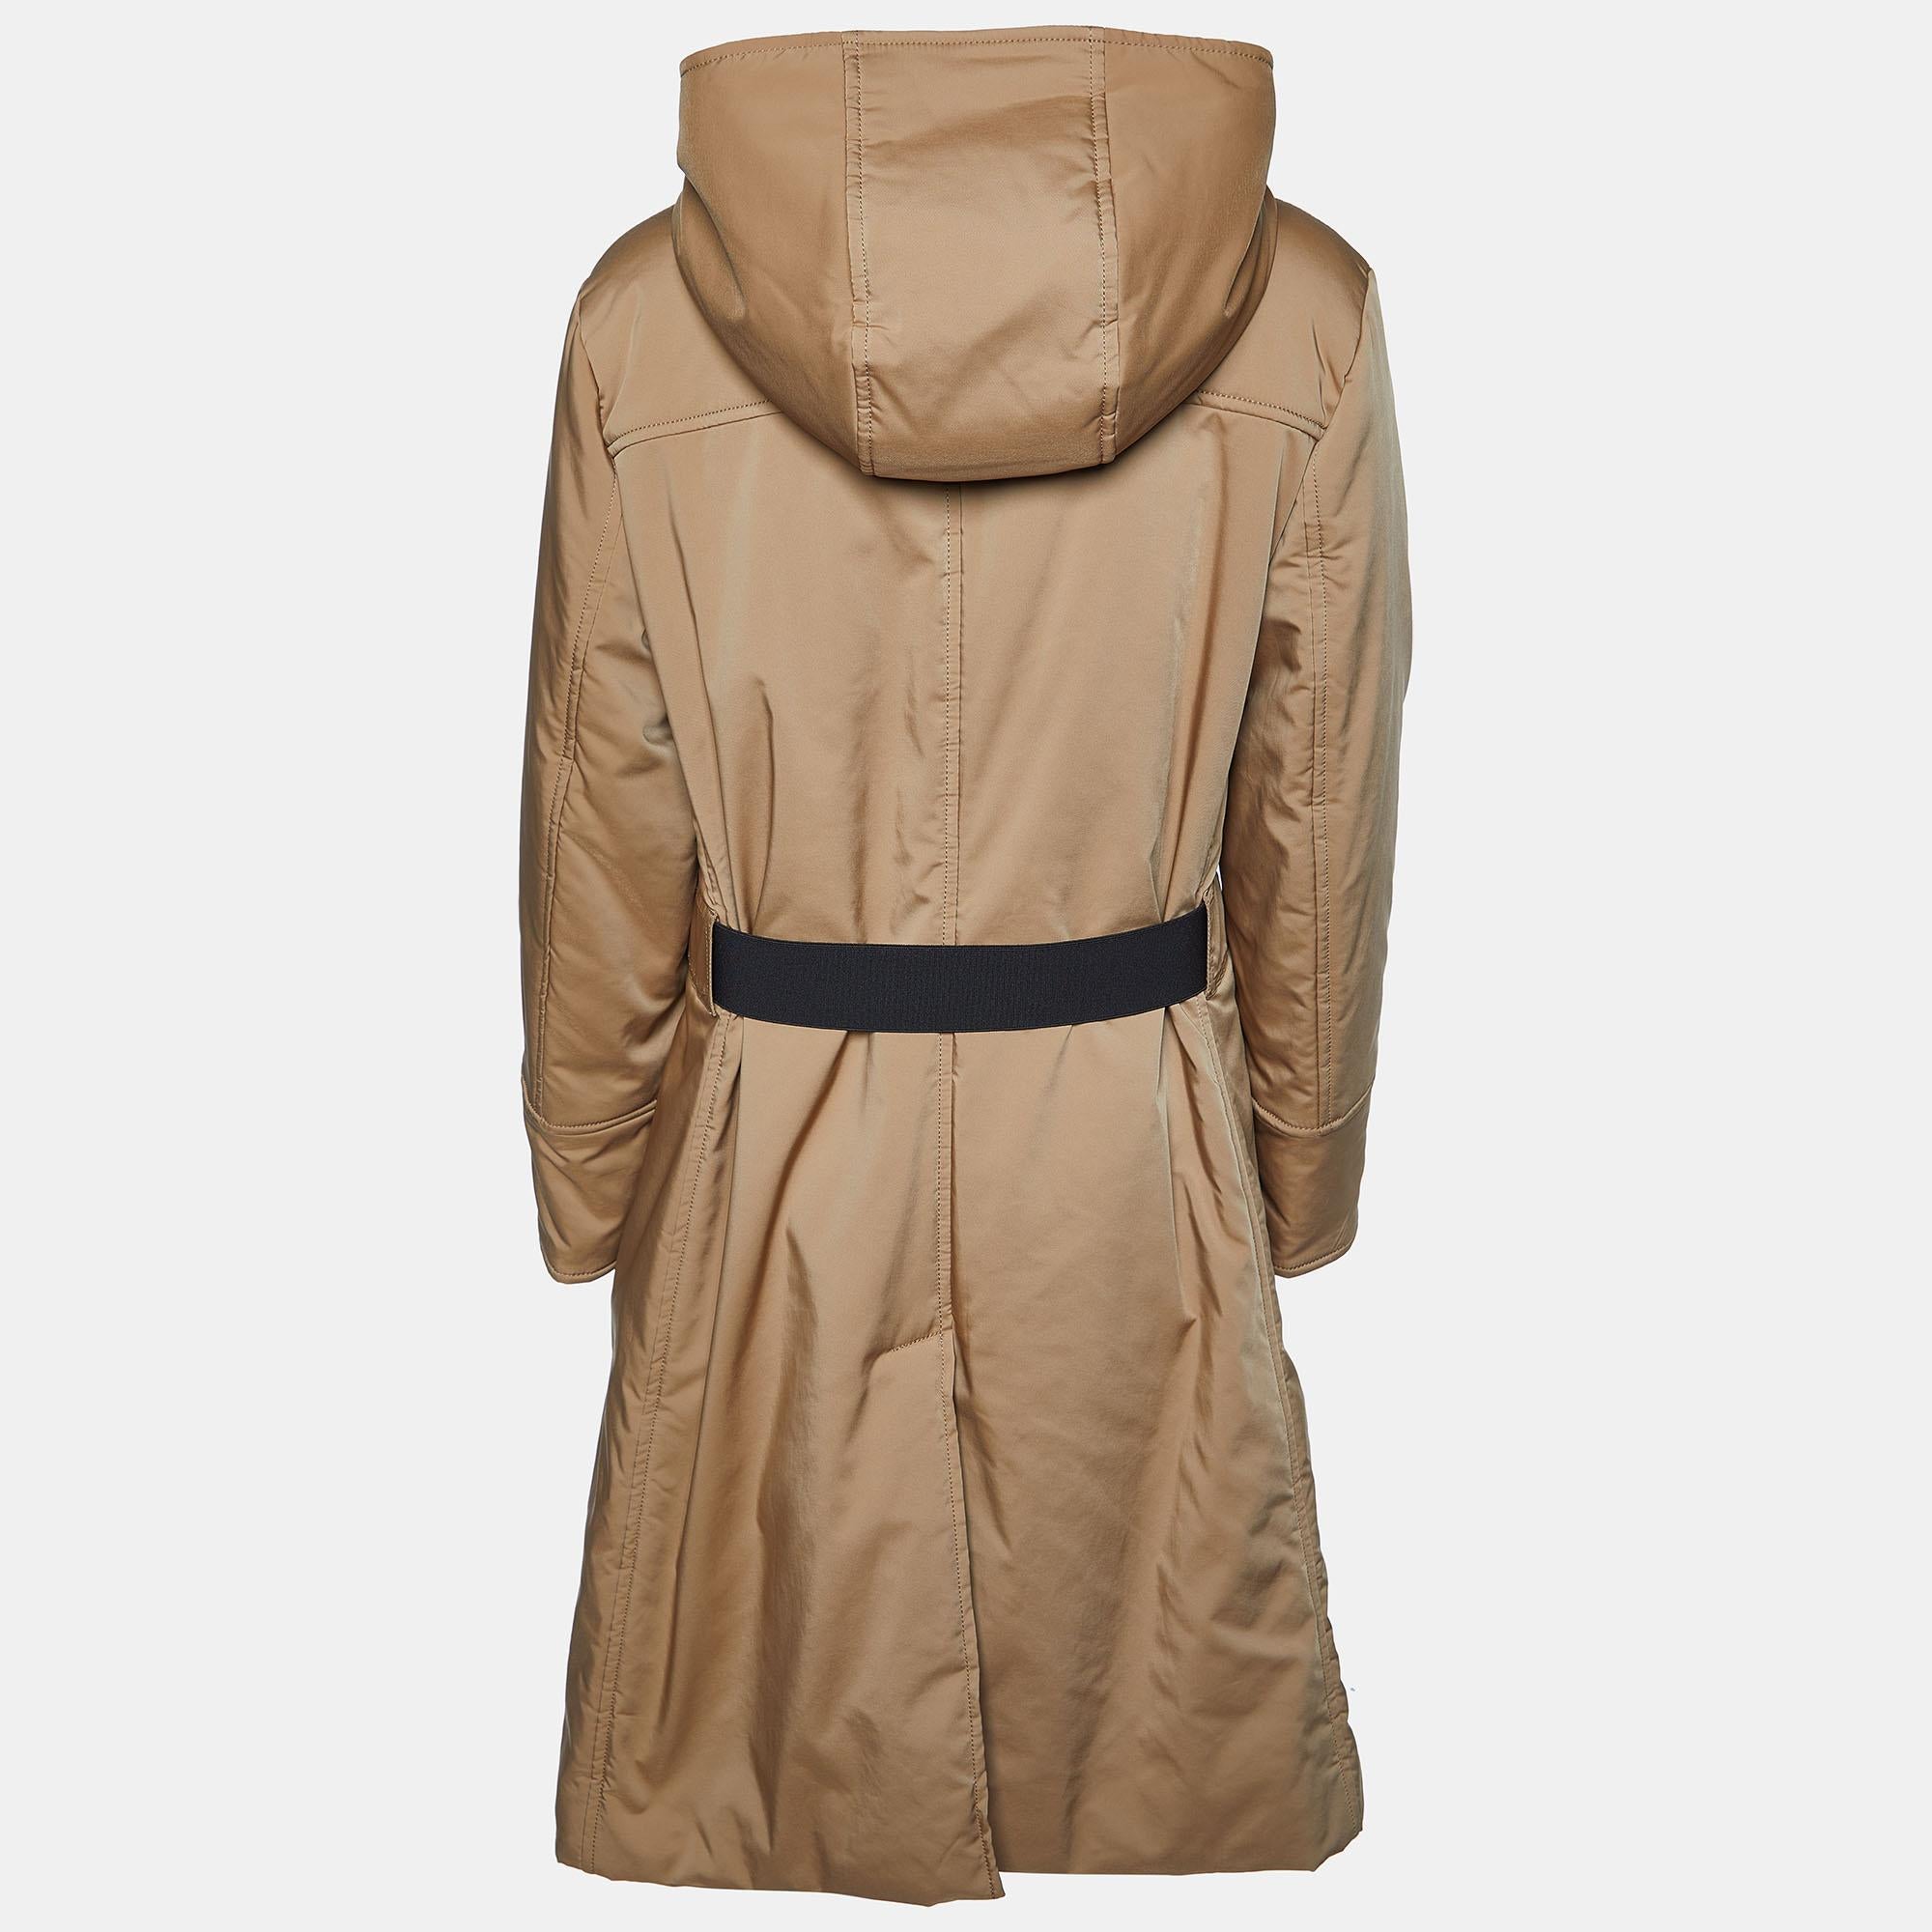 Wrap yourself in warmth and style with the CH Carolina Herrera Brown Hooded Puffer Coat. Crafted with exquisite attention to detail, this coat boasts a rich brown hue and a luxurious puffer design. Its cozy hood offers protection from the elements,